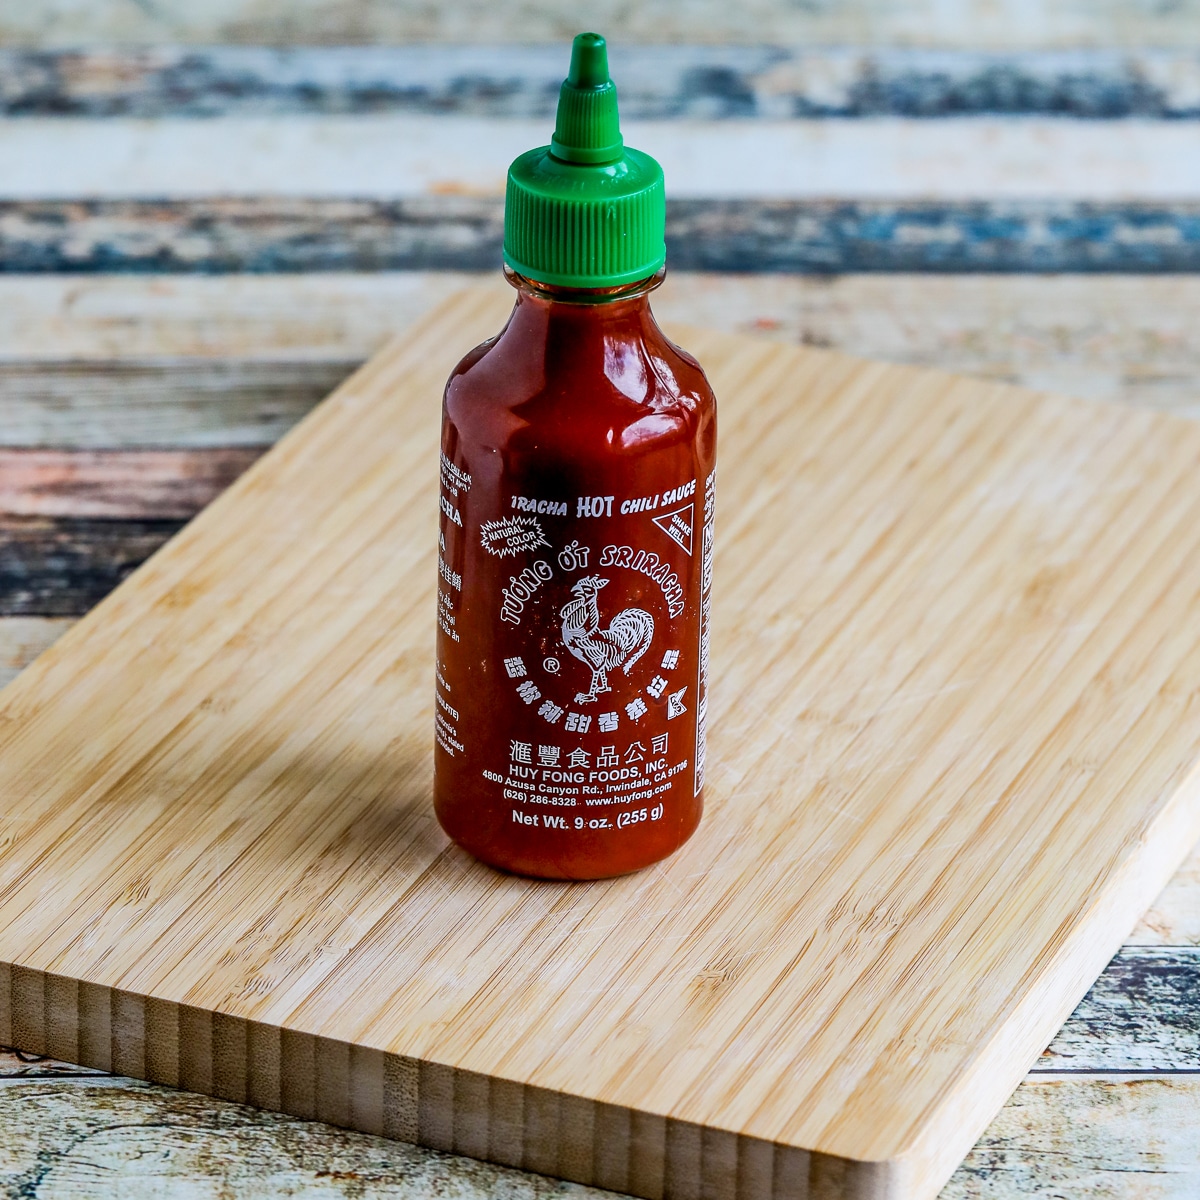 Square image of Sriracha Sauce bottle shown on cutting board.